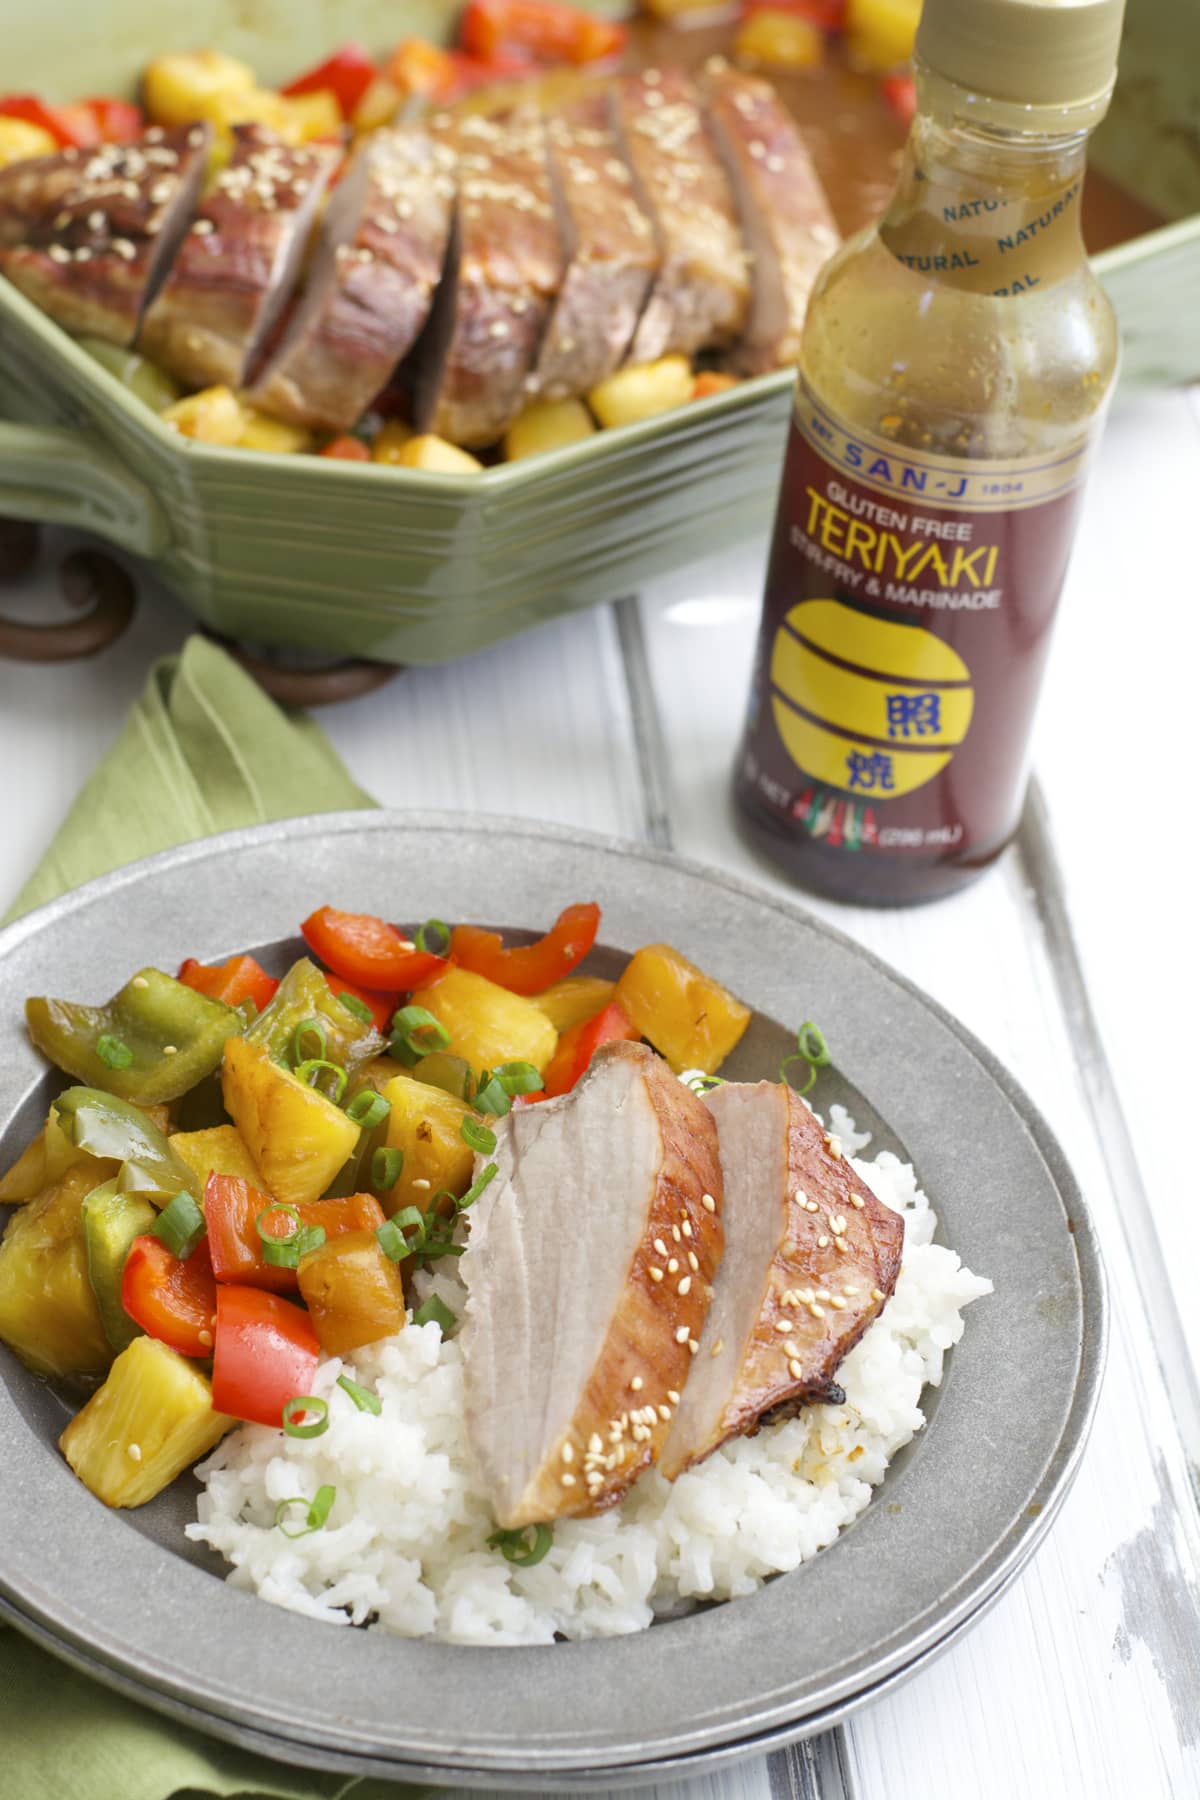 This five ingredient Teriyaki Pork with Pineapple and Peppers is packed with flavor and very easy to prepare!